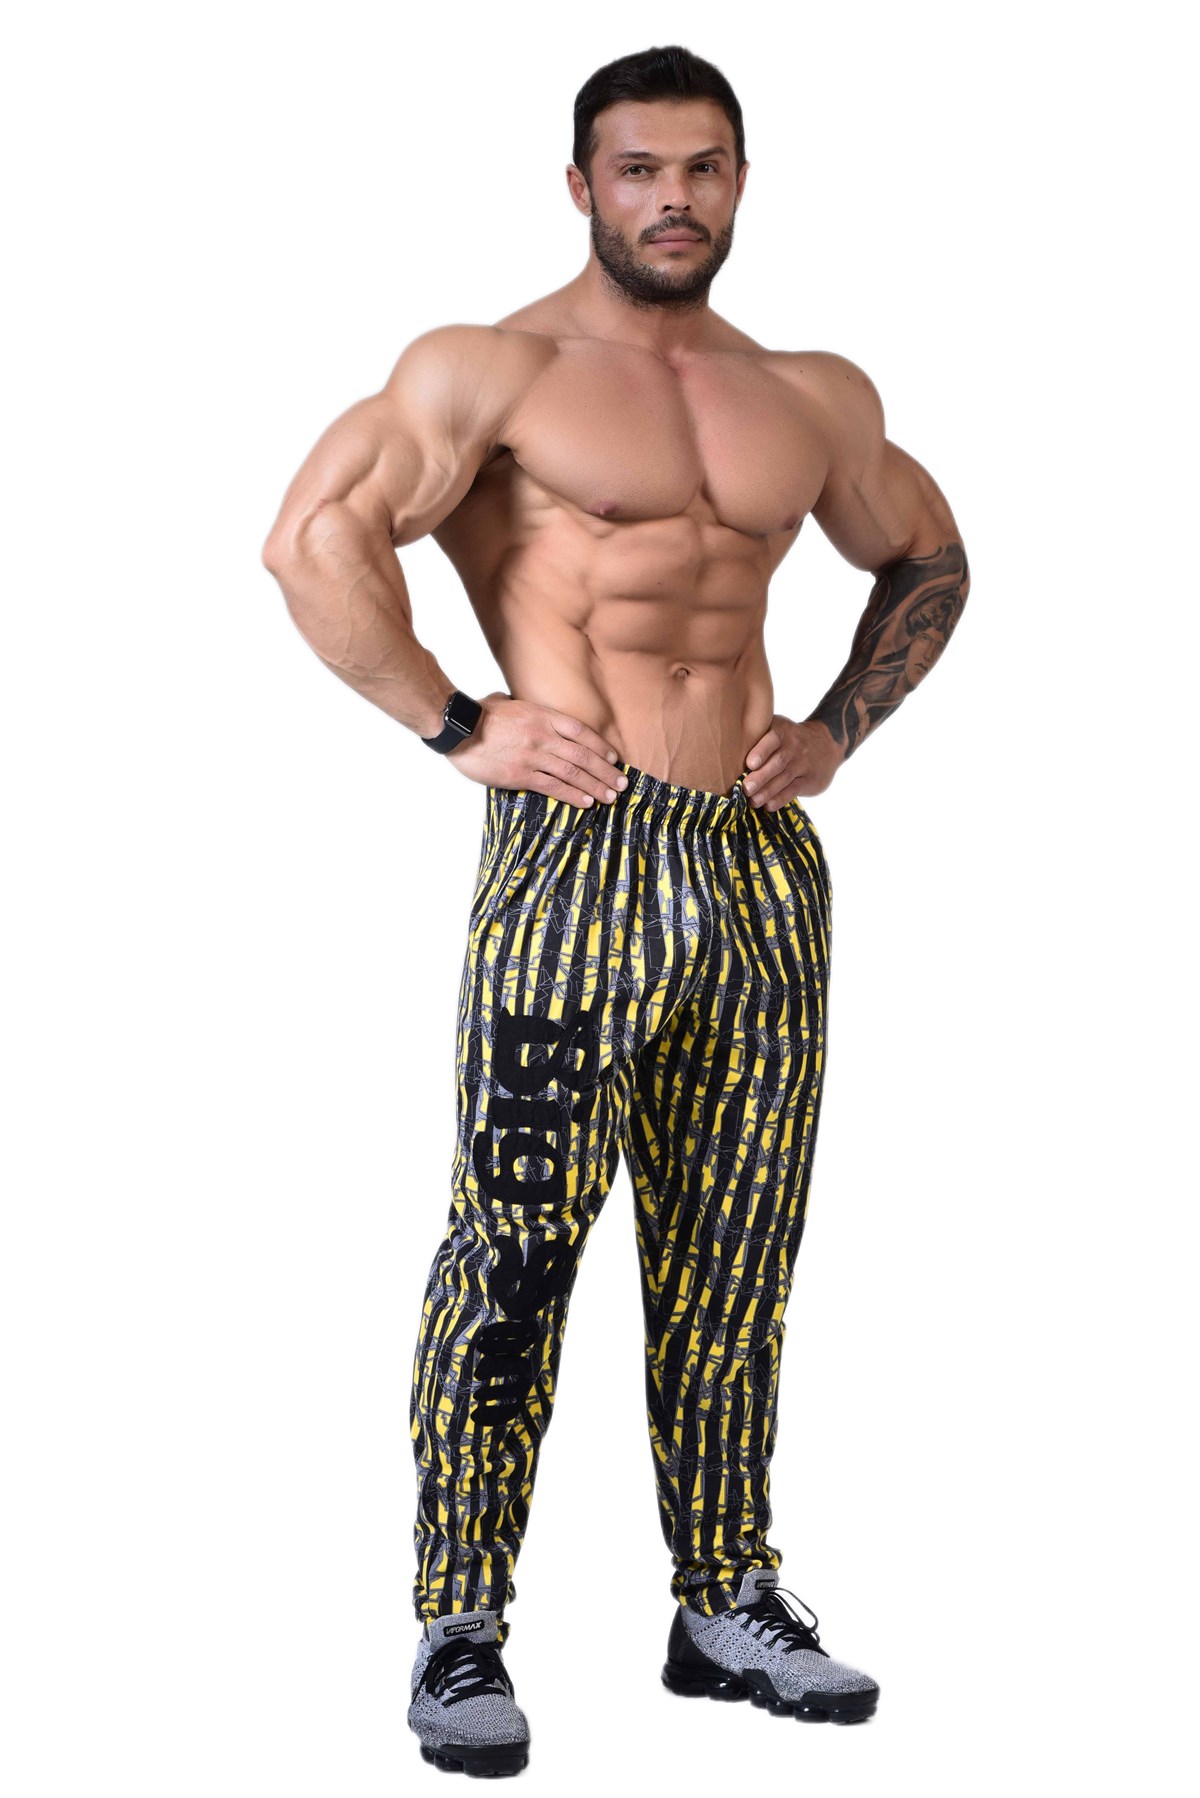 Source Striped Cotton Baggy gym pants for Bodybuilding workout Night Wear  Sleeping Pants Shirts on malibabacom